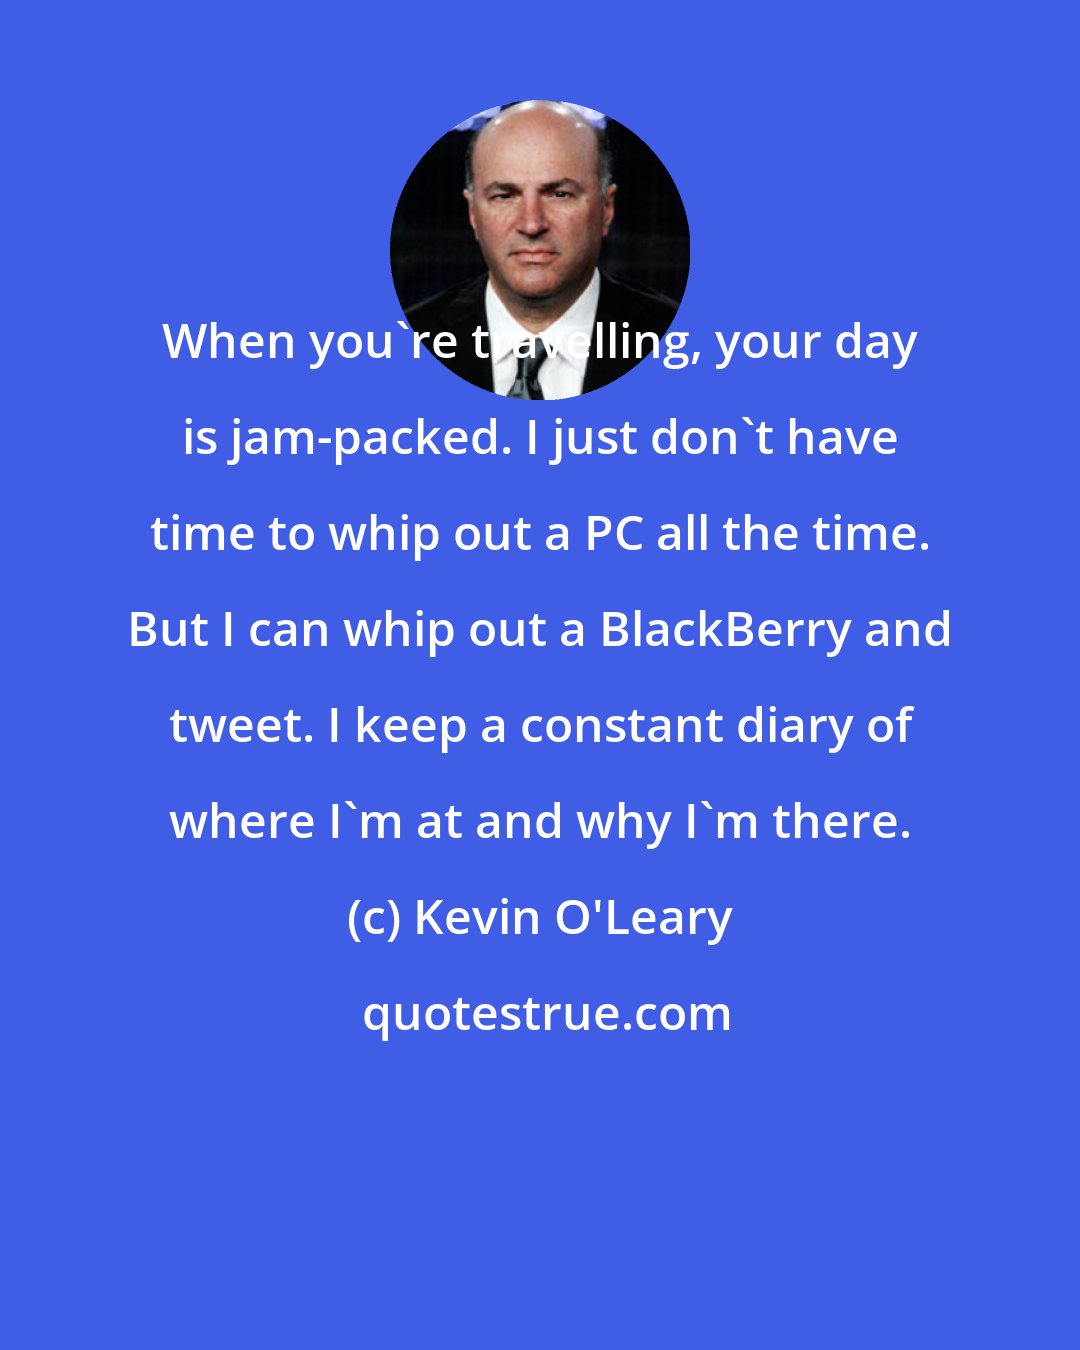 Kevin O'Leary: When you're travelling, your day is jam-packed. I just don't have time to whip out a PC all the time. But I can whip out a BlackBerry and tweet. I keep a constant diary of where I'm at and why I'm there.